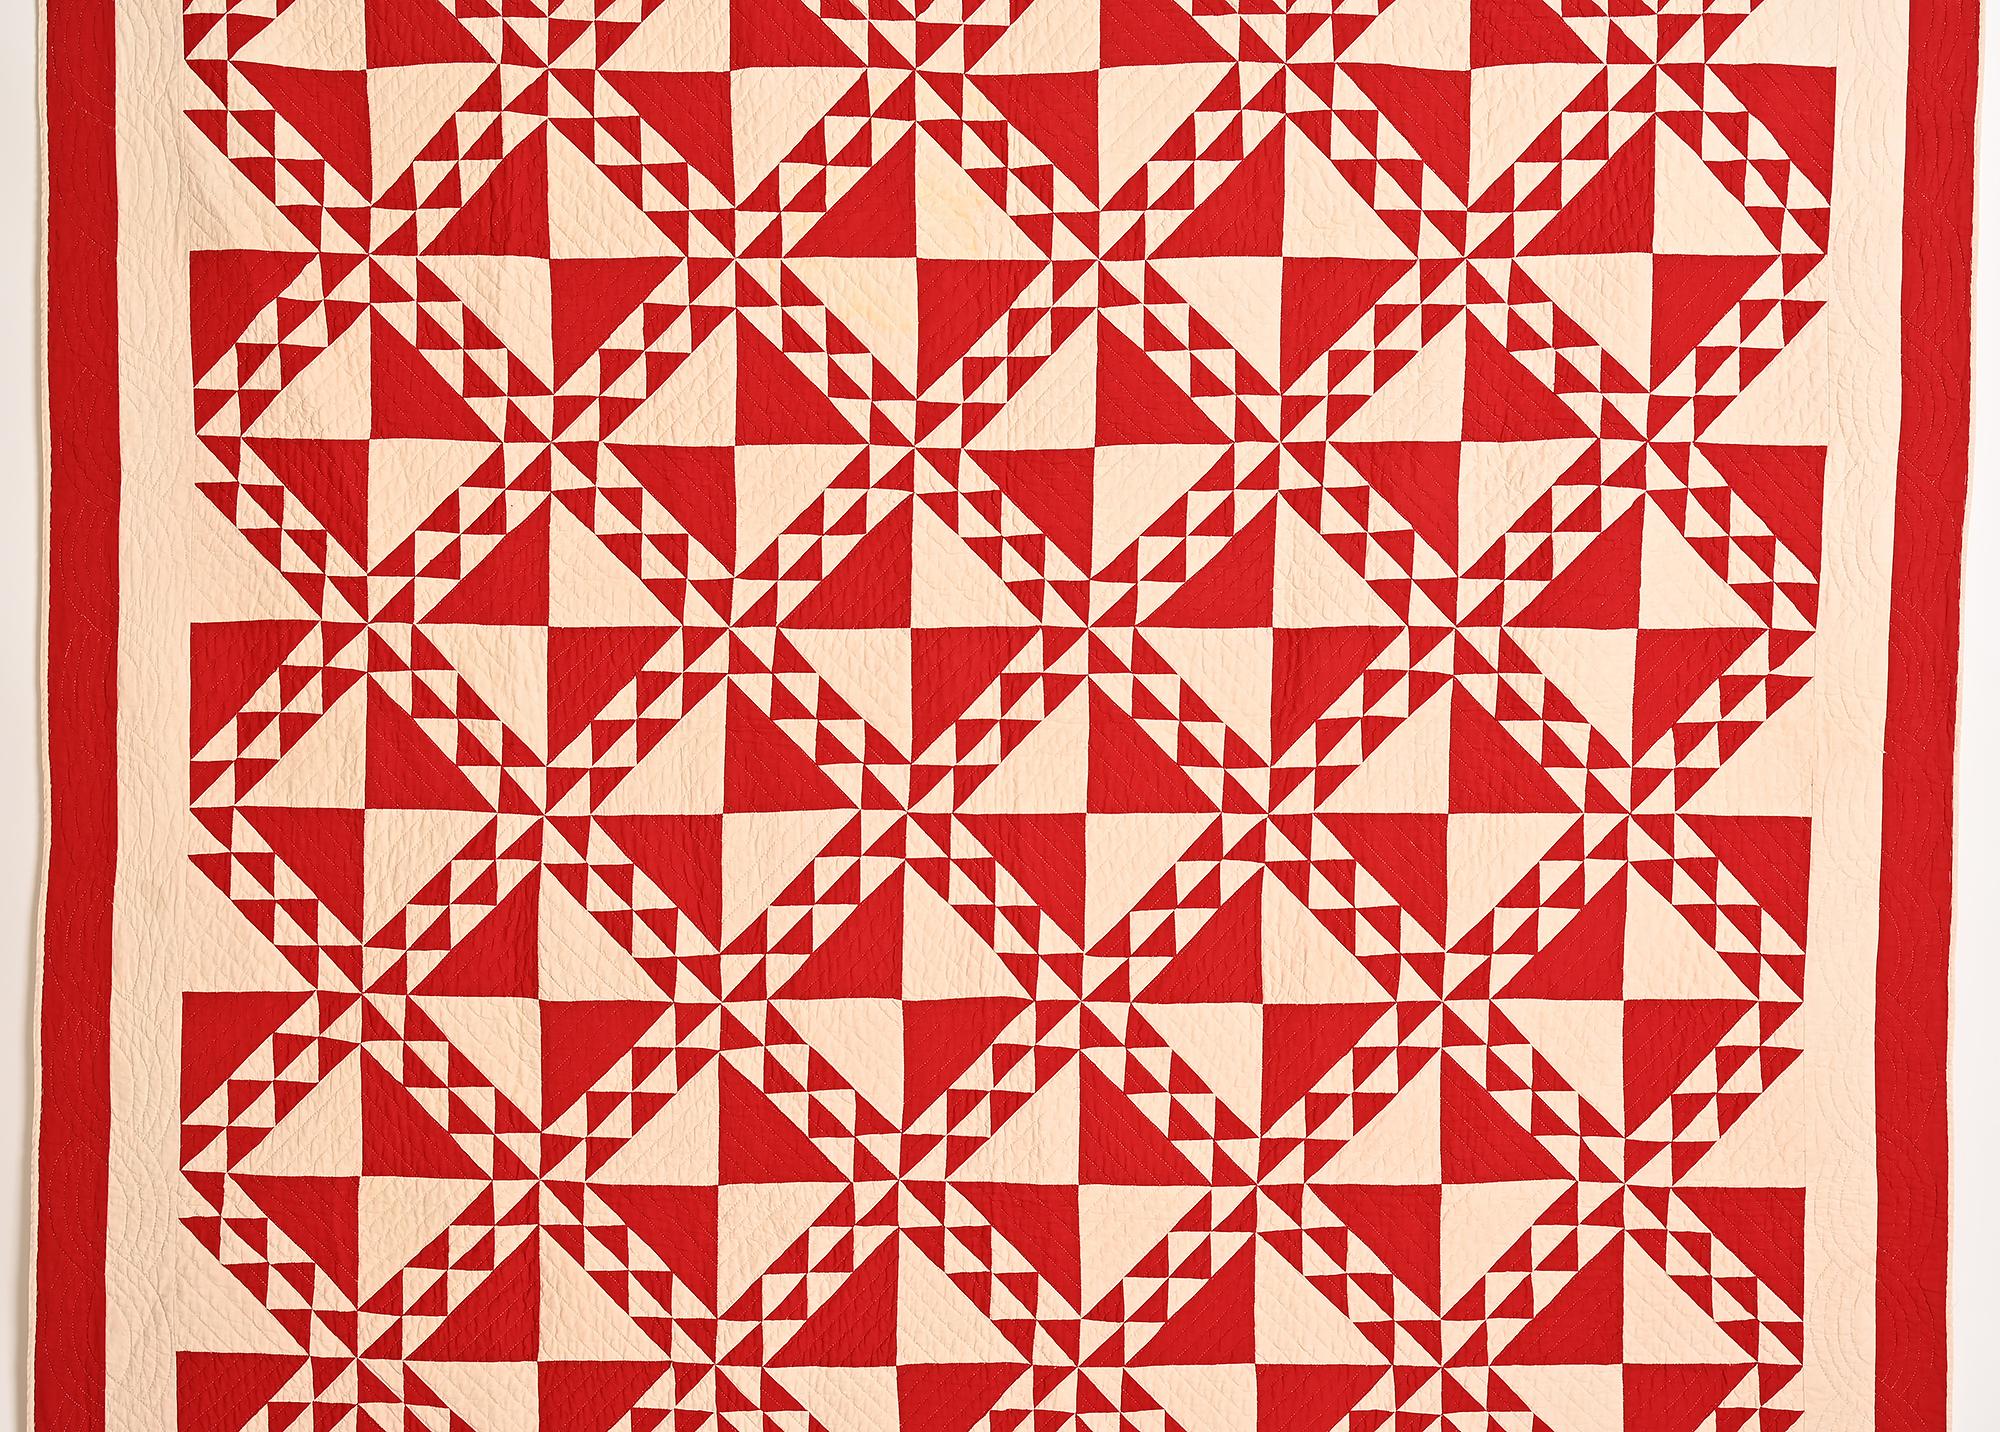 Lady of the Lake can best be described as a more complex version of the Ocean Waves pattern. Rather than the usual open center to each large block, it is divided into four triangles. The solid red of this example makes for an especially dynamic